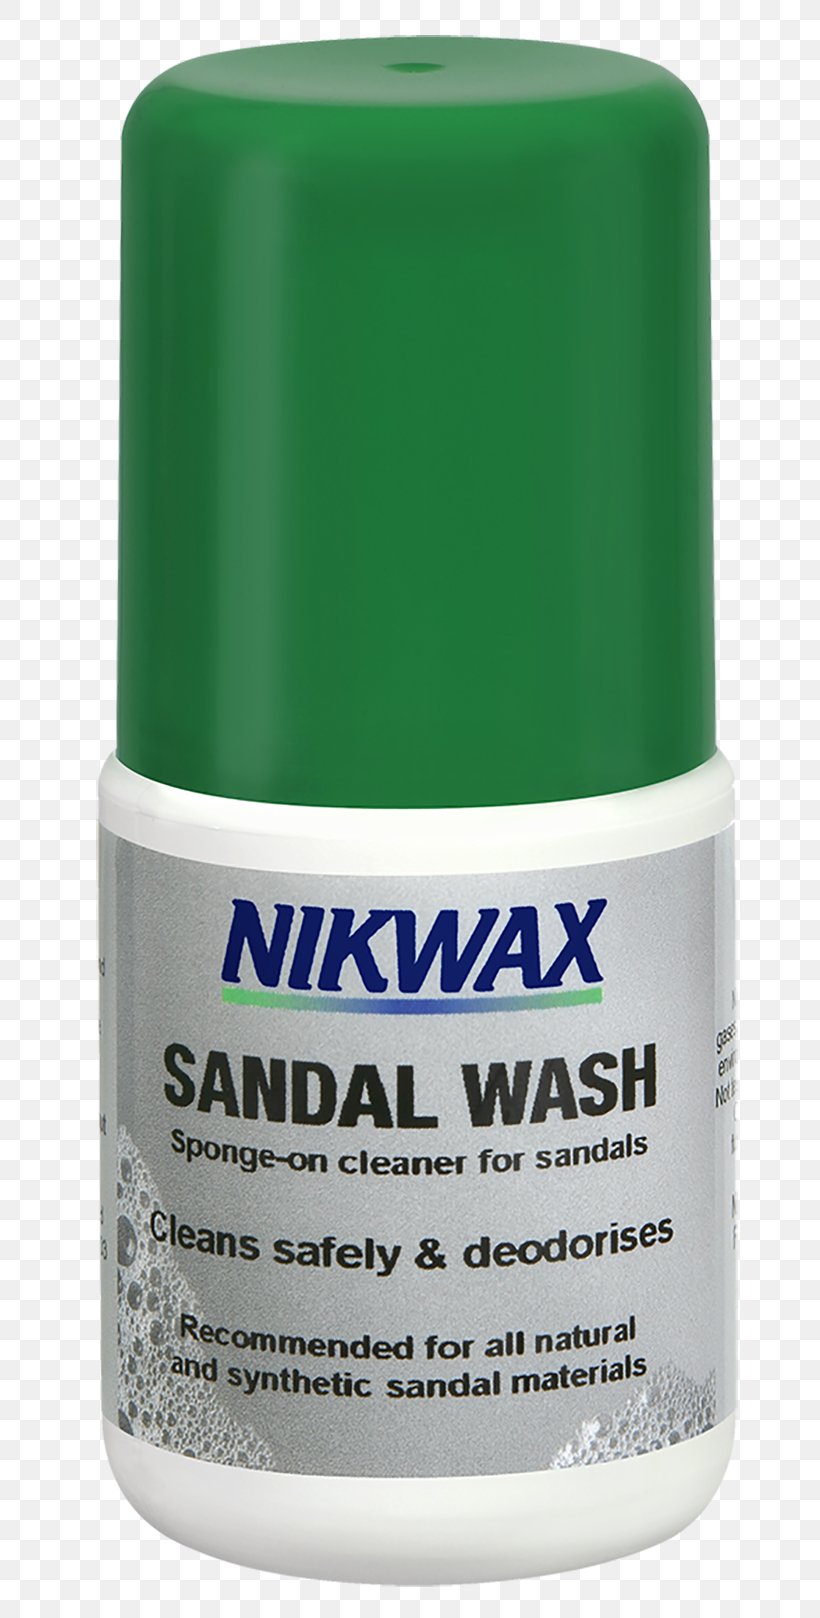 Nikwax Waterproofing Wax For Leather Impermeabilização Cream Product, PNG, 730x1618px, Cream, Laundry, Leather, Milliliter, Waterproofing Download Free